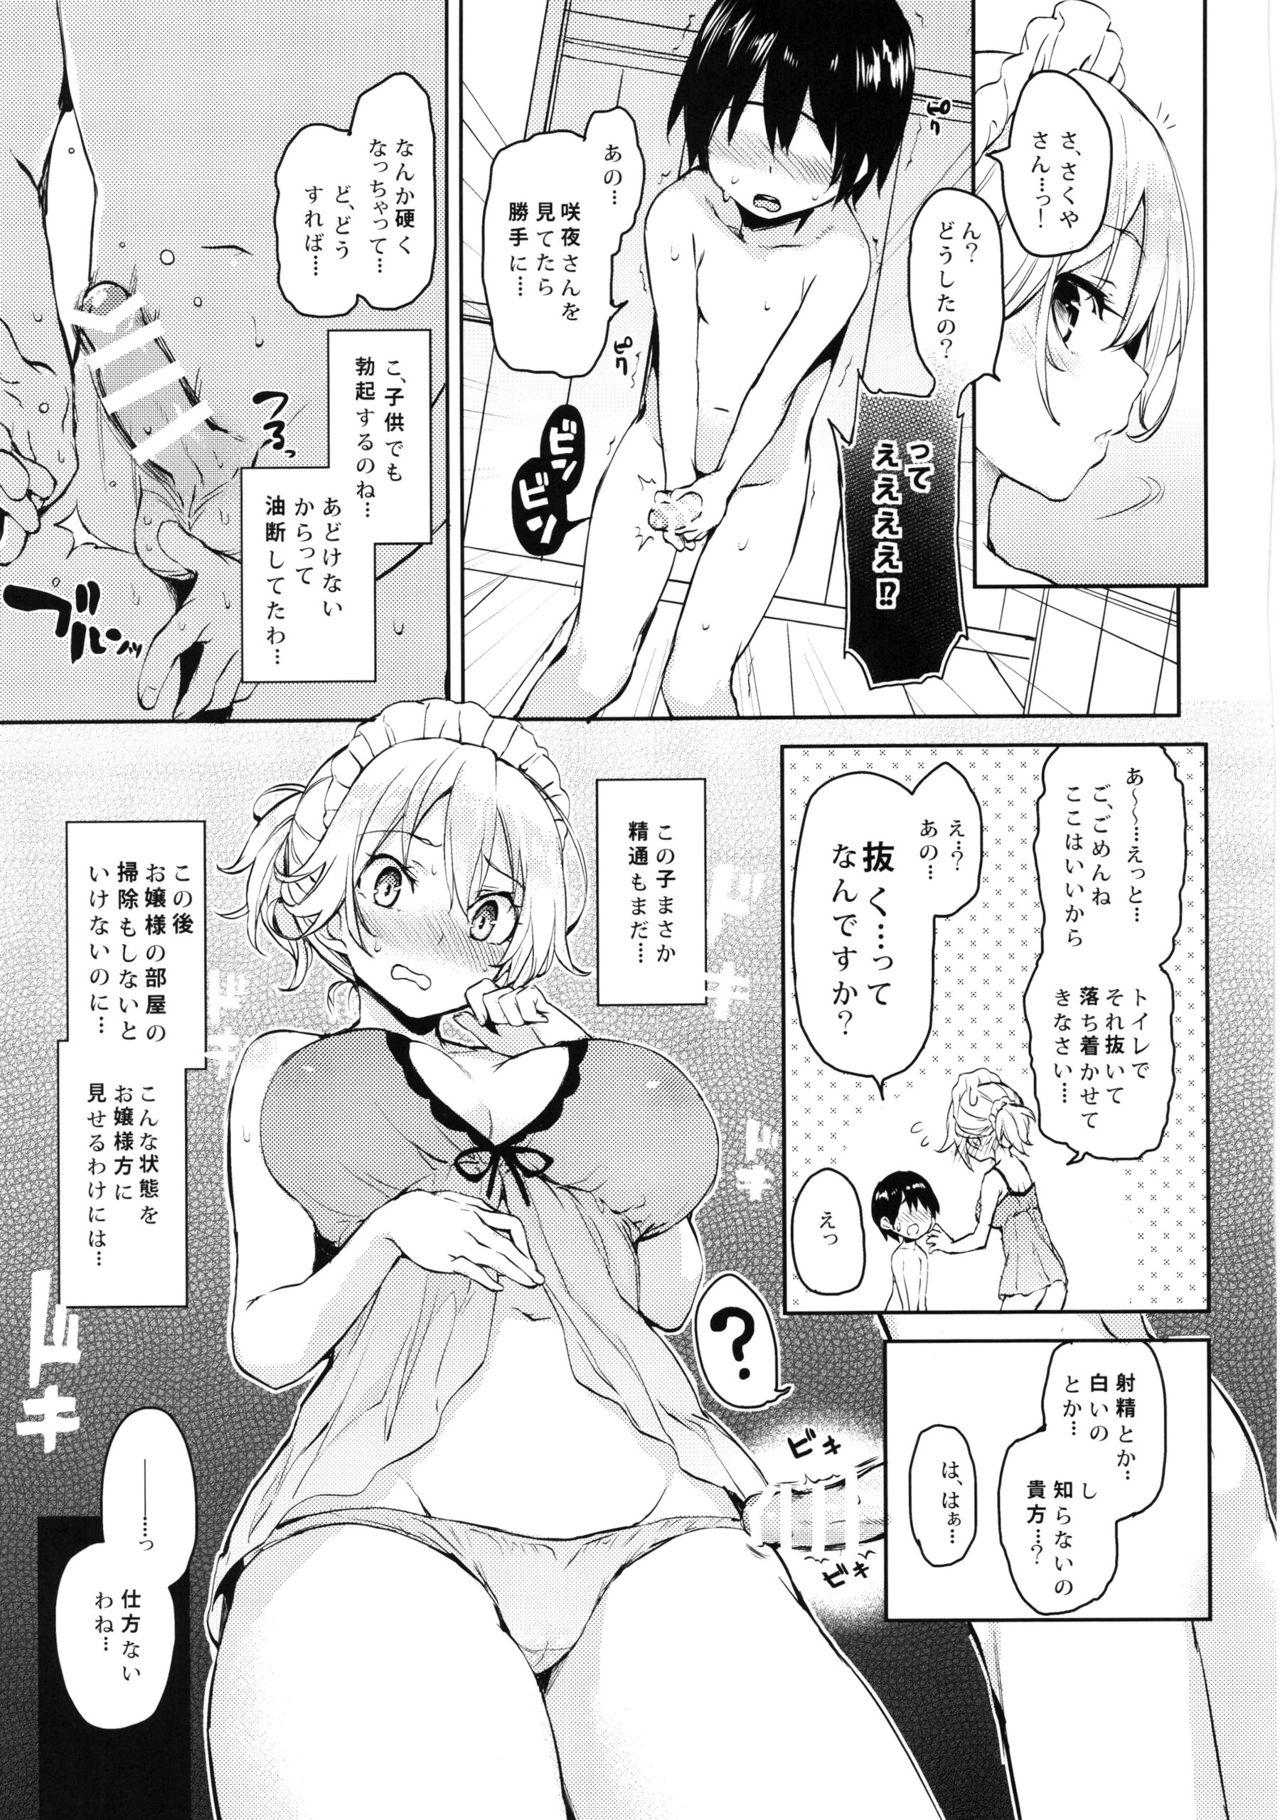 Cream ANMITSU TOUHOU HISTORY Vol.2 - Touhou project Lesbos - Page 6